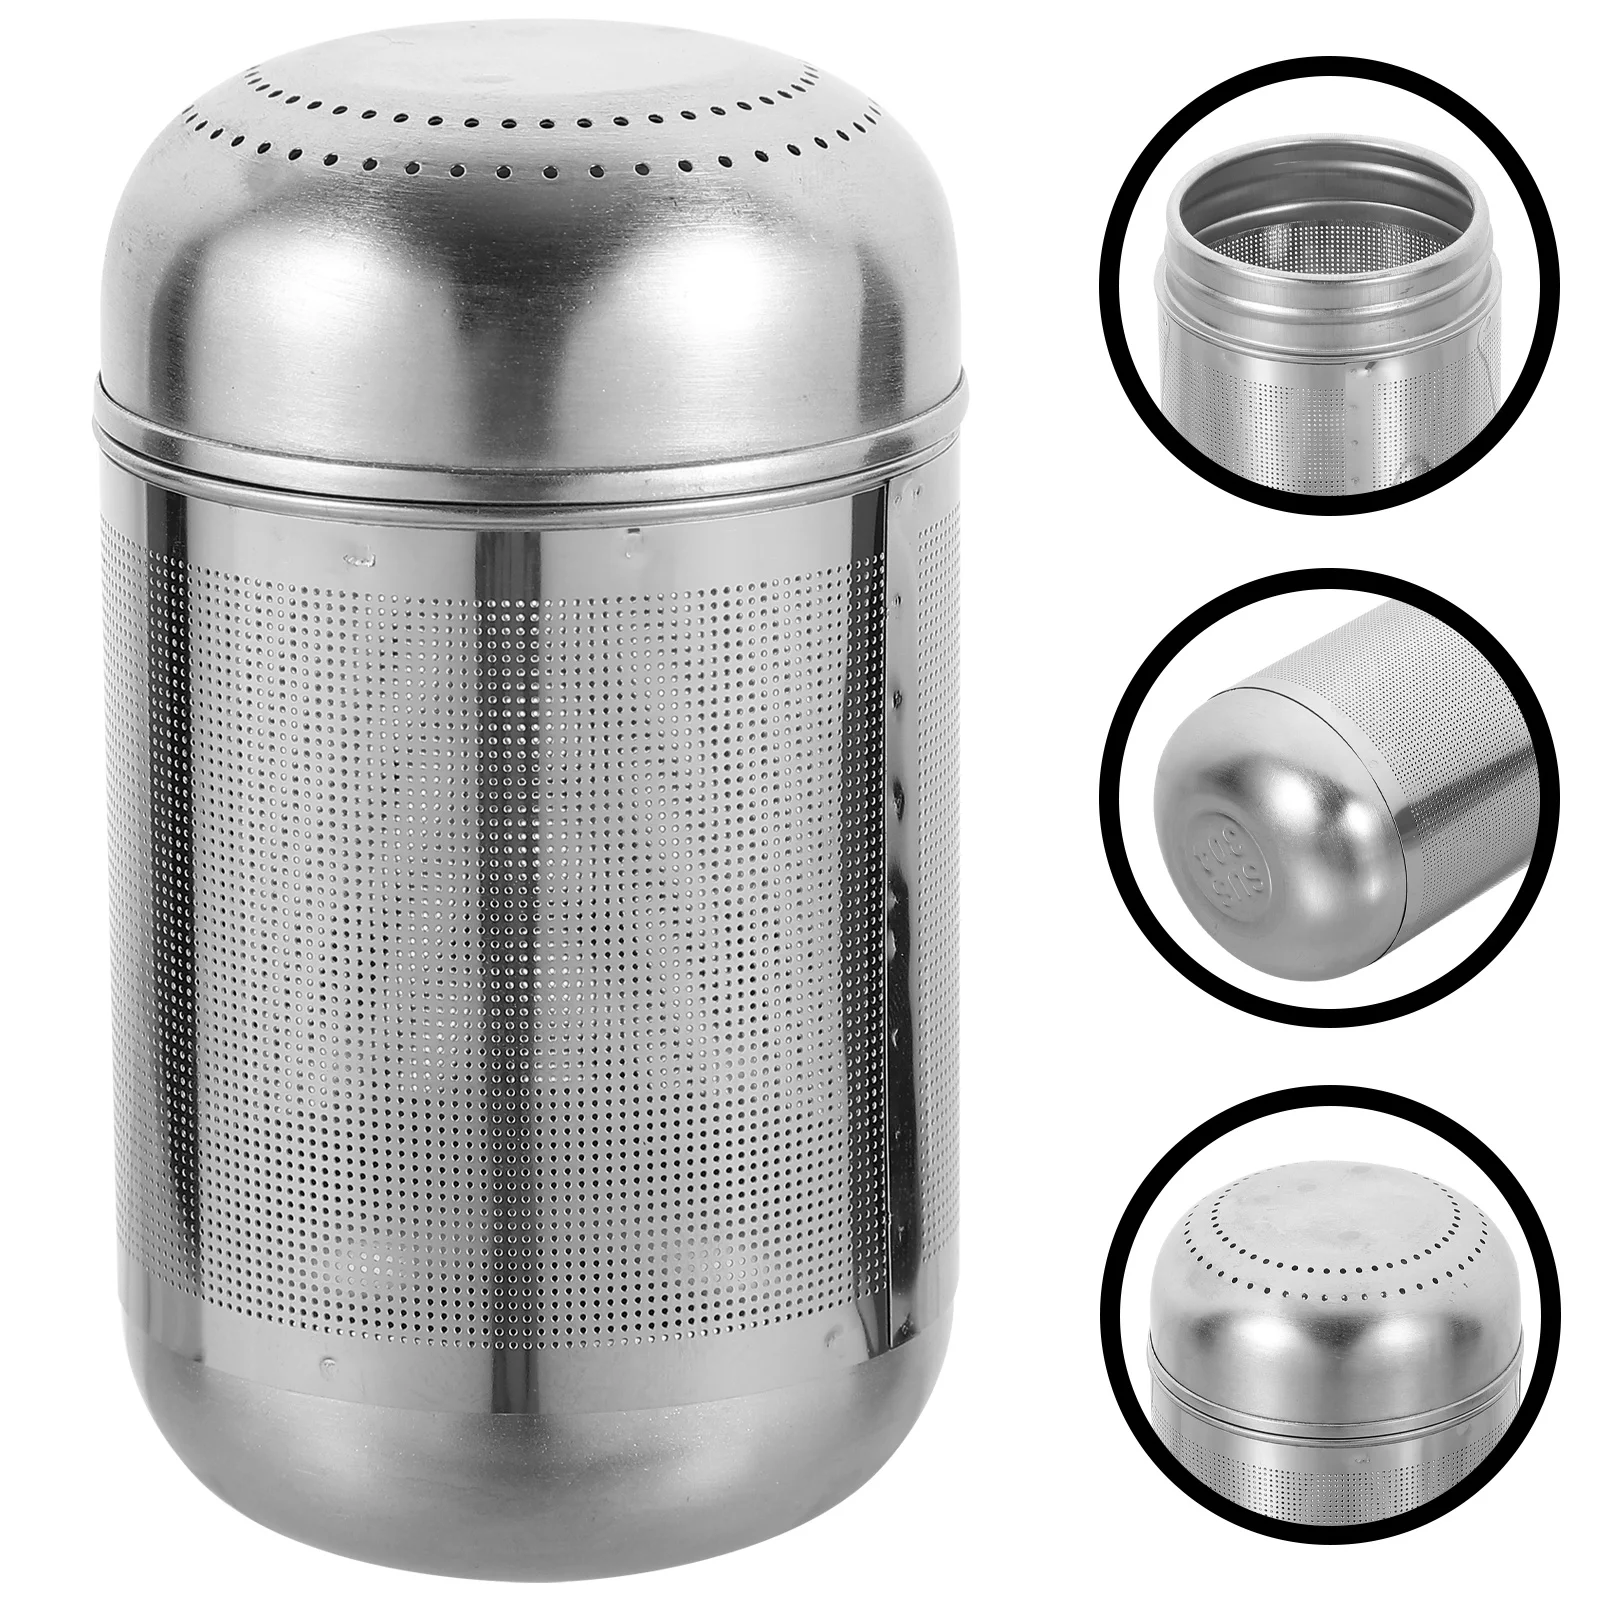 

Tea Filter Stainless Steel Strainer Leaf Loose Teapot Reusable Convenient Seasoning Infuser Home Accessory